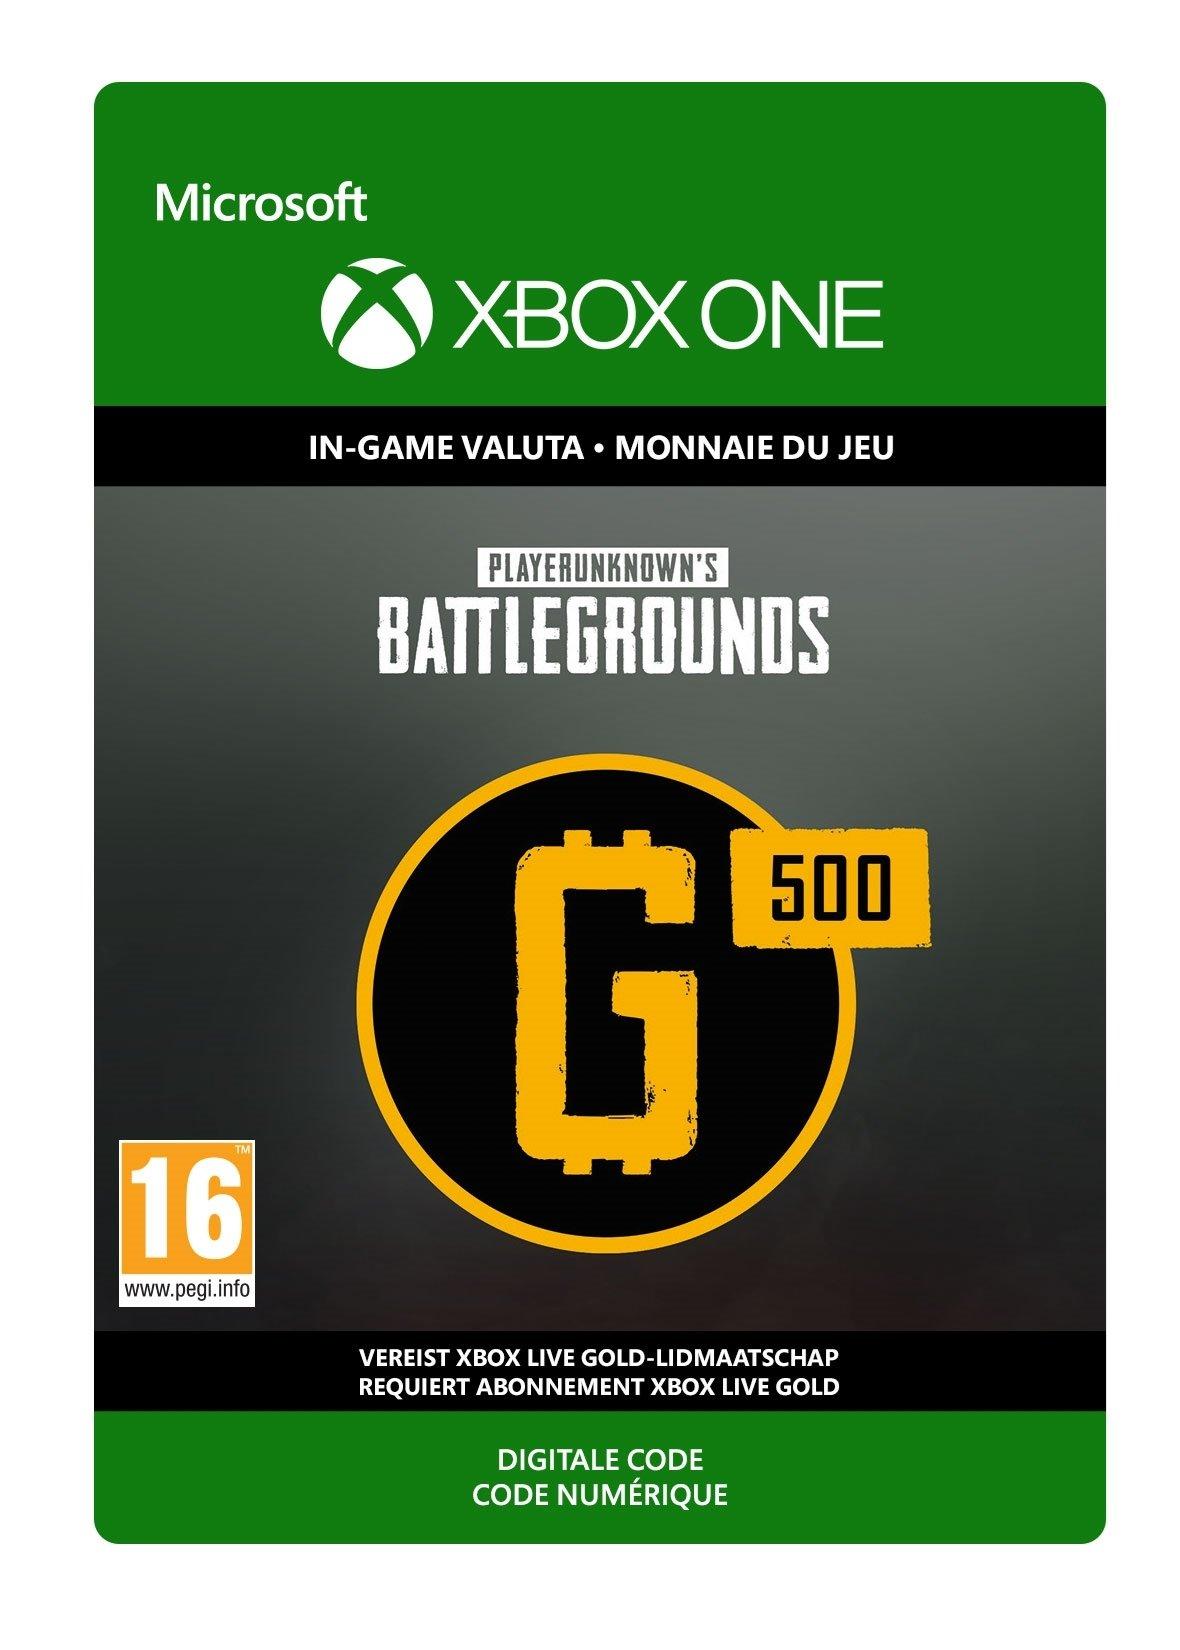 Playerunknown's battlegrounds 500 G-Coin - Xbox One - Consumable | 7LM-00021 (8fbab506-f527-7a41-9de0-d7fd79e0c6f4)